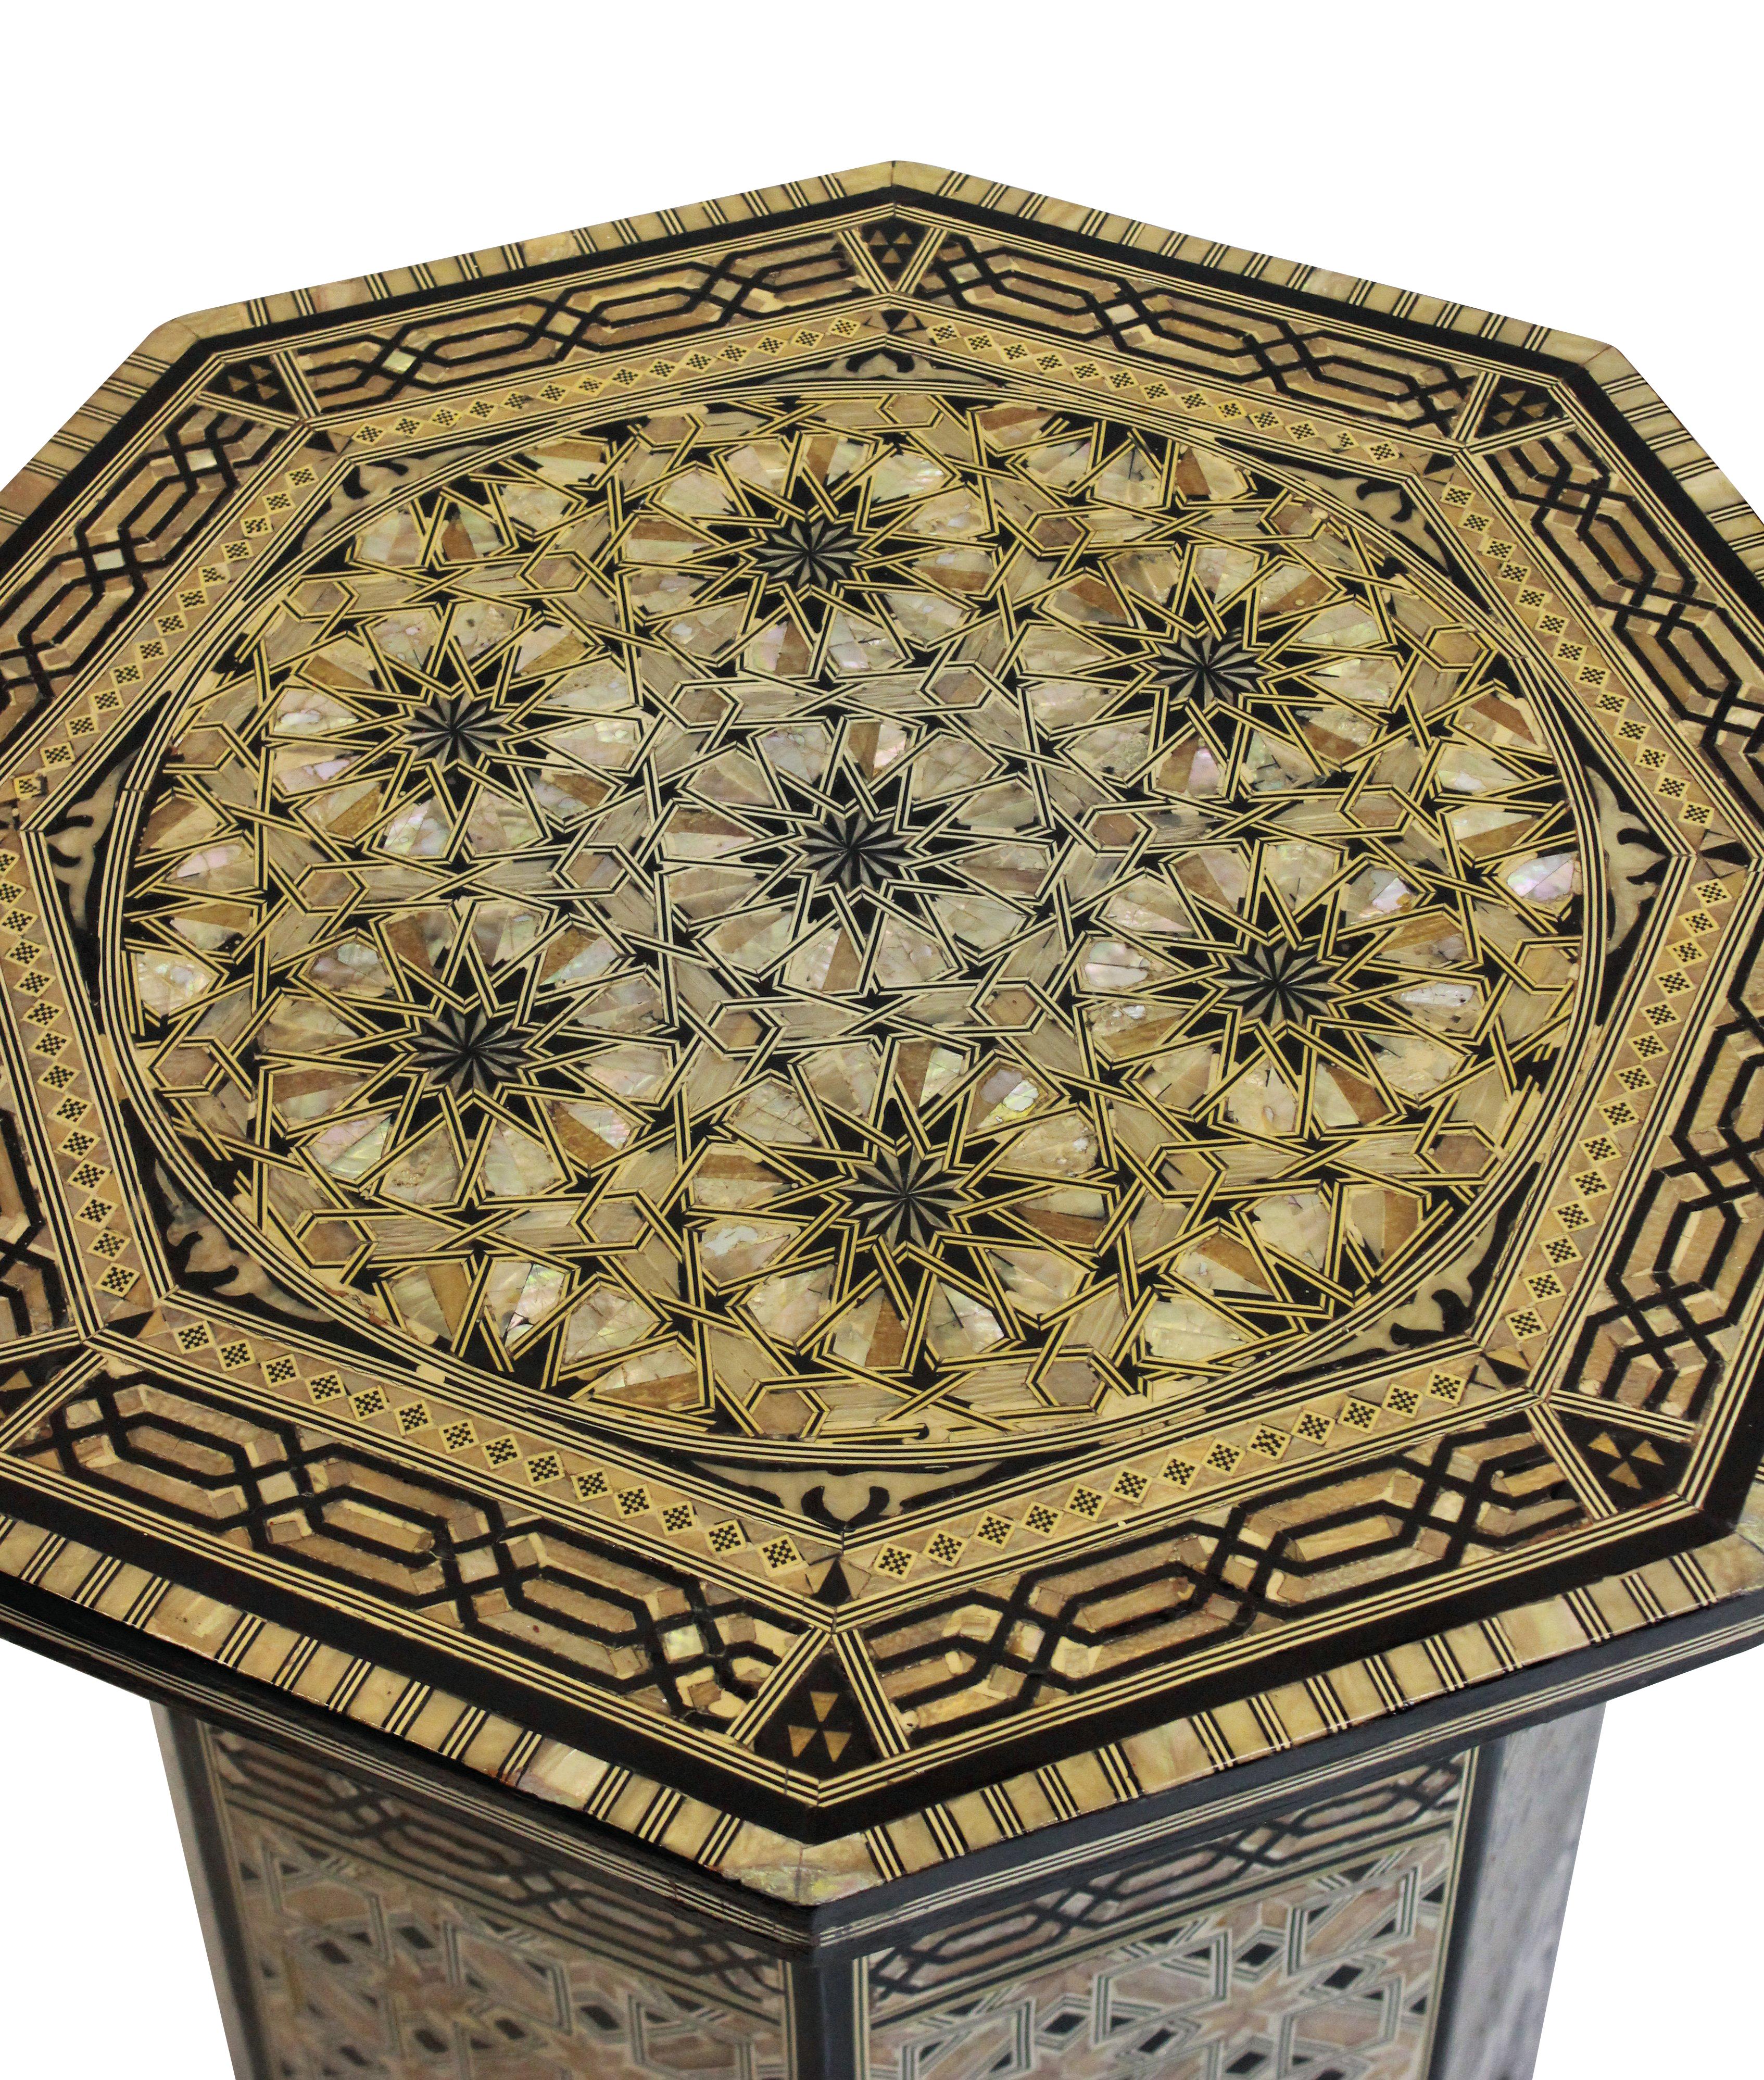 A fine Syrian bone, Horn and mother-of-pearl octagonal inlaid table of intricate detail. With a compartment inside velvet lined.
 
 